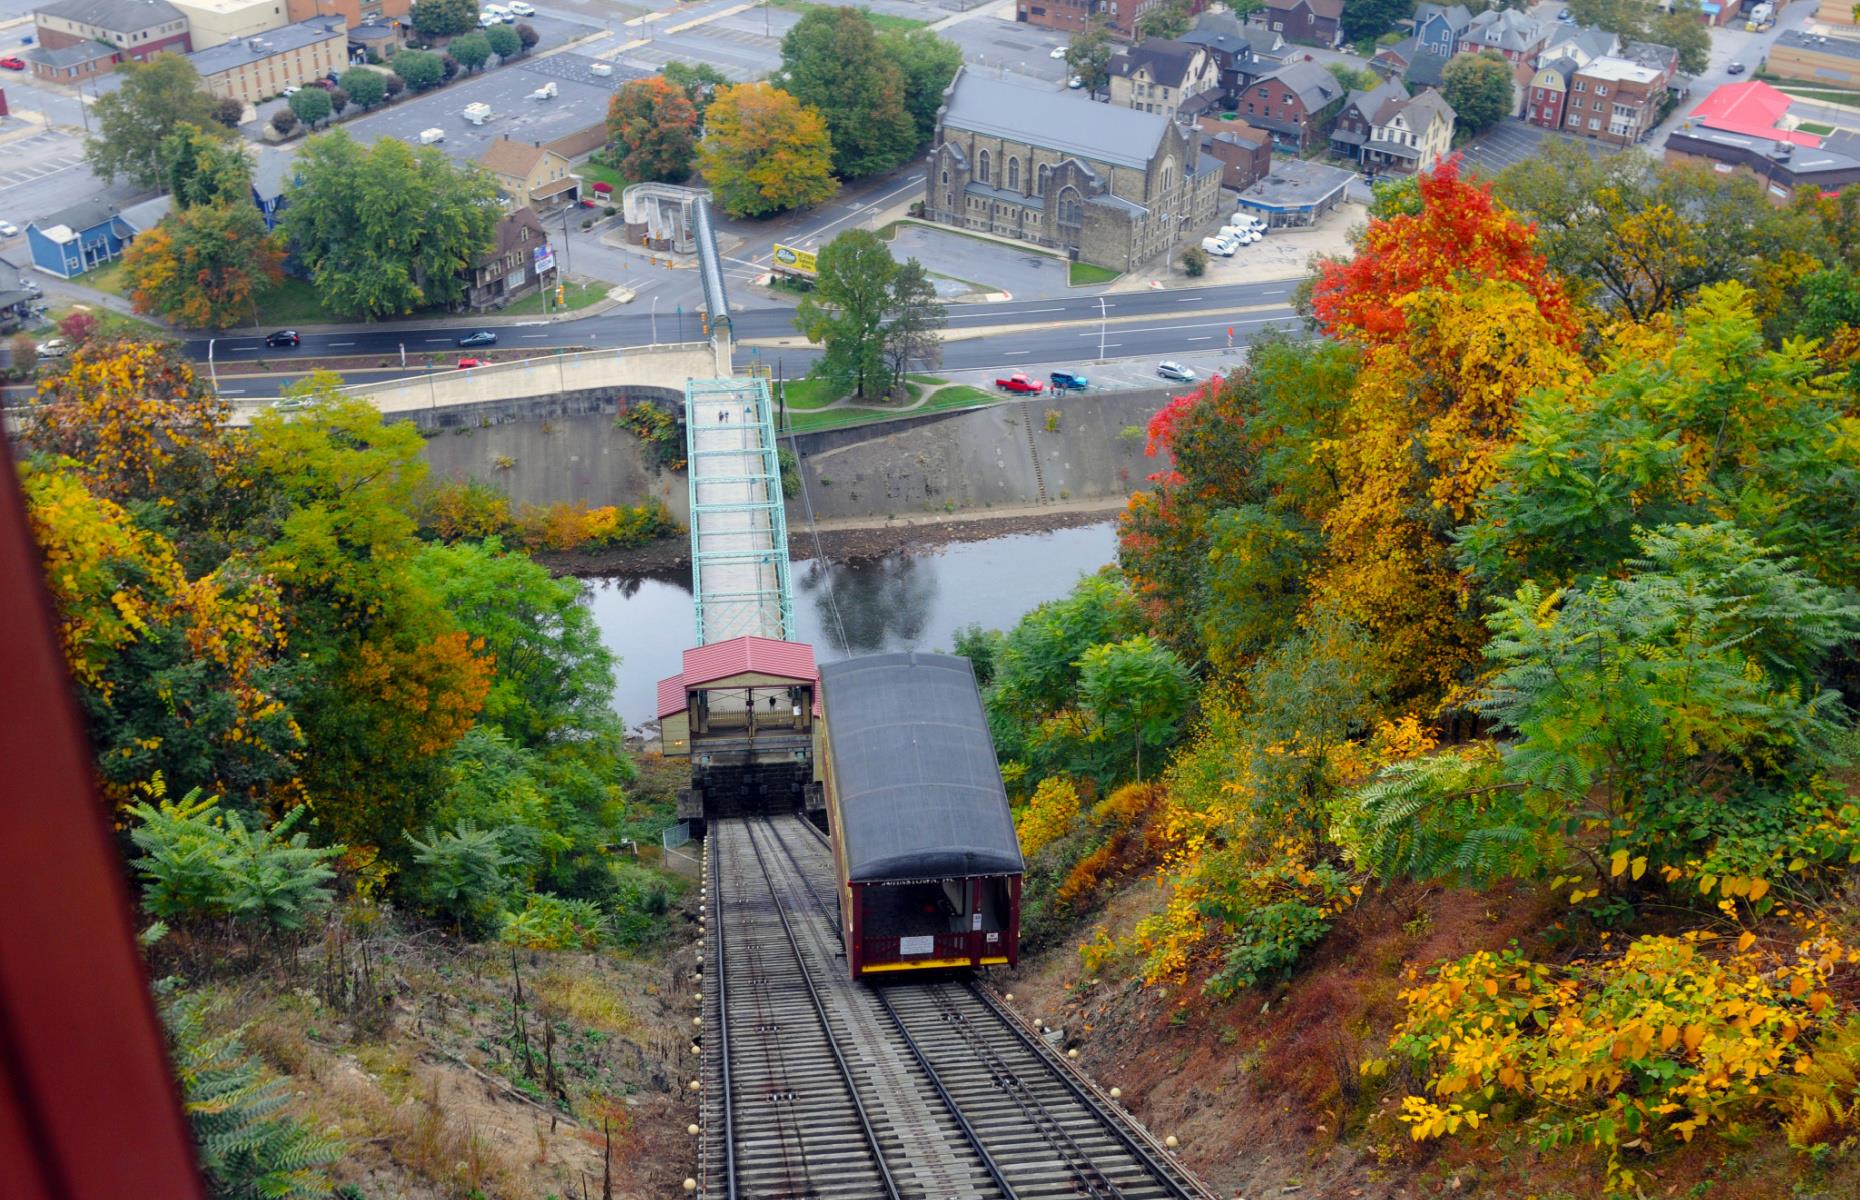 <p>Billed as the world’s steepest vehicular inclined plane, this <a href="https://www.inclinedplane.org/history/">stretch of train track</a> goes straight up a hill from the valley that contains the town of Johnstown. Johnstown was quite famously devastated by a flood in 1889 and the tracks were built to transport inhabitants to a new, safer community higher up the valley. The incline did its job again in 1936 when another flood struck and the train brought 4,000 people upwards to dry land.</p>  <p><a href="https://www.loveexploring.com/galleries/90532/the-worlds-worst-floods?page=1"><strong>These are the world's worst-ever floods</strong></a></p>